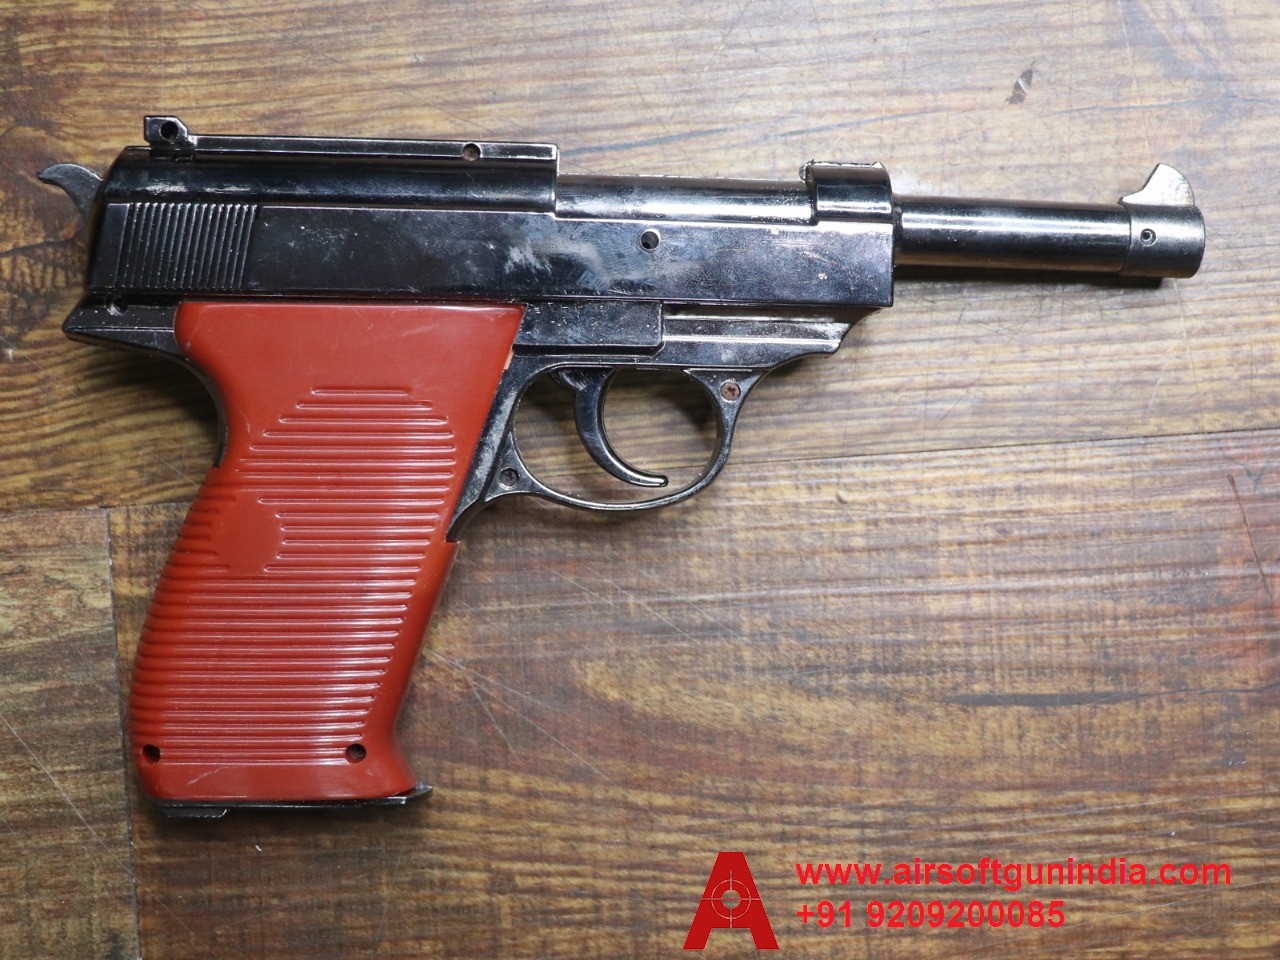 WALTHER P38 REPLICA LIGHTER BY AIRSOFT GUN INDIA